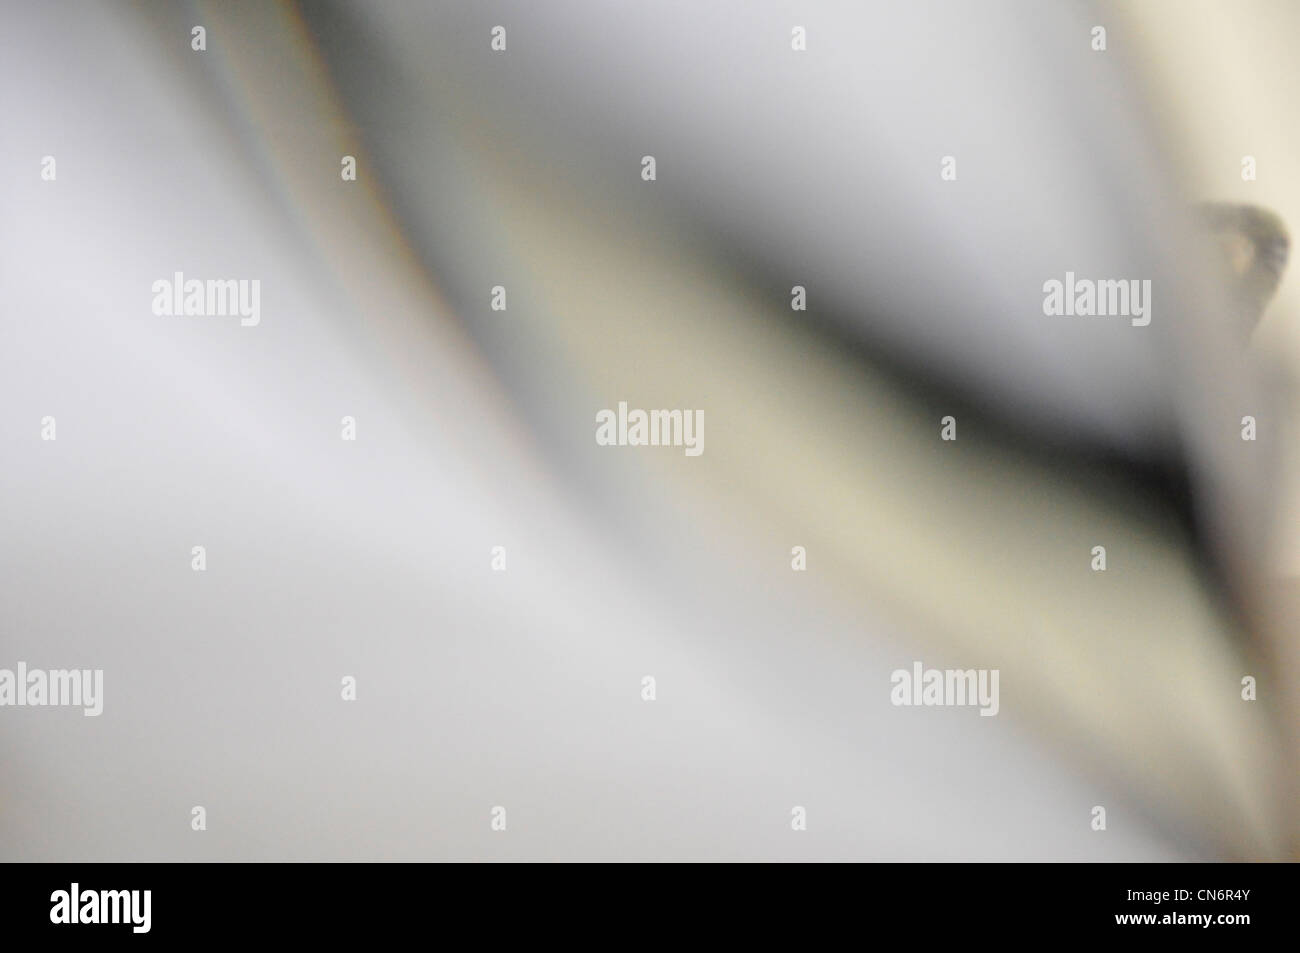 Abstract unfocused swirling white gray background Stock Photo